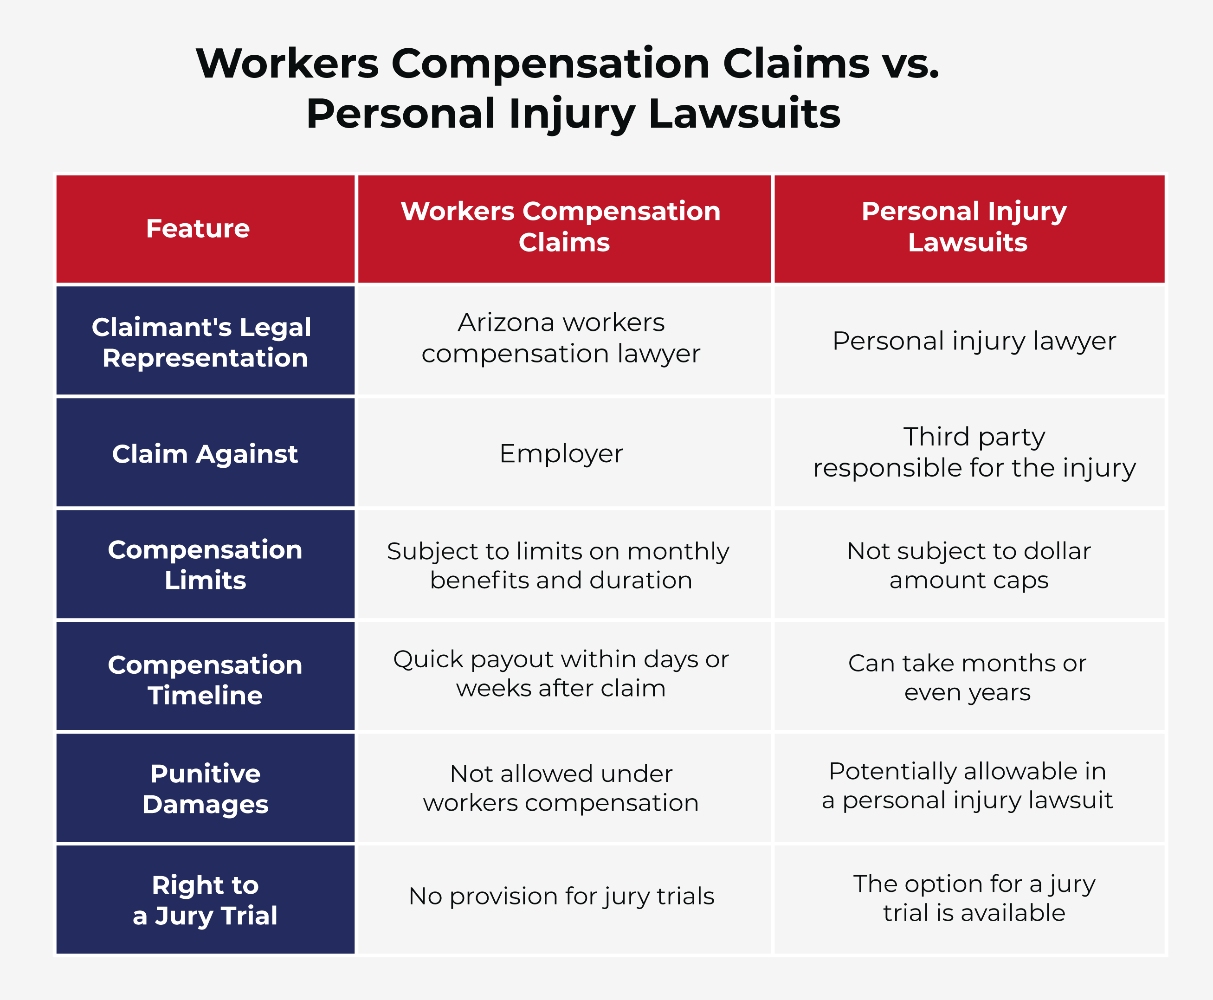 Workers comp claims vs personal injury lawsuits